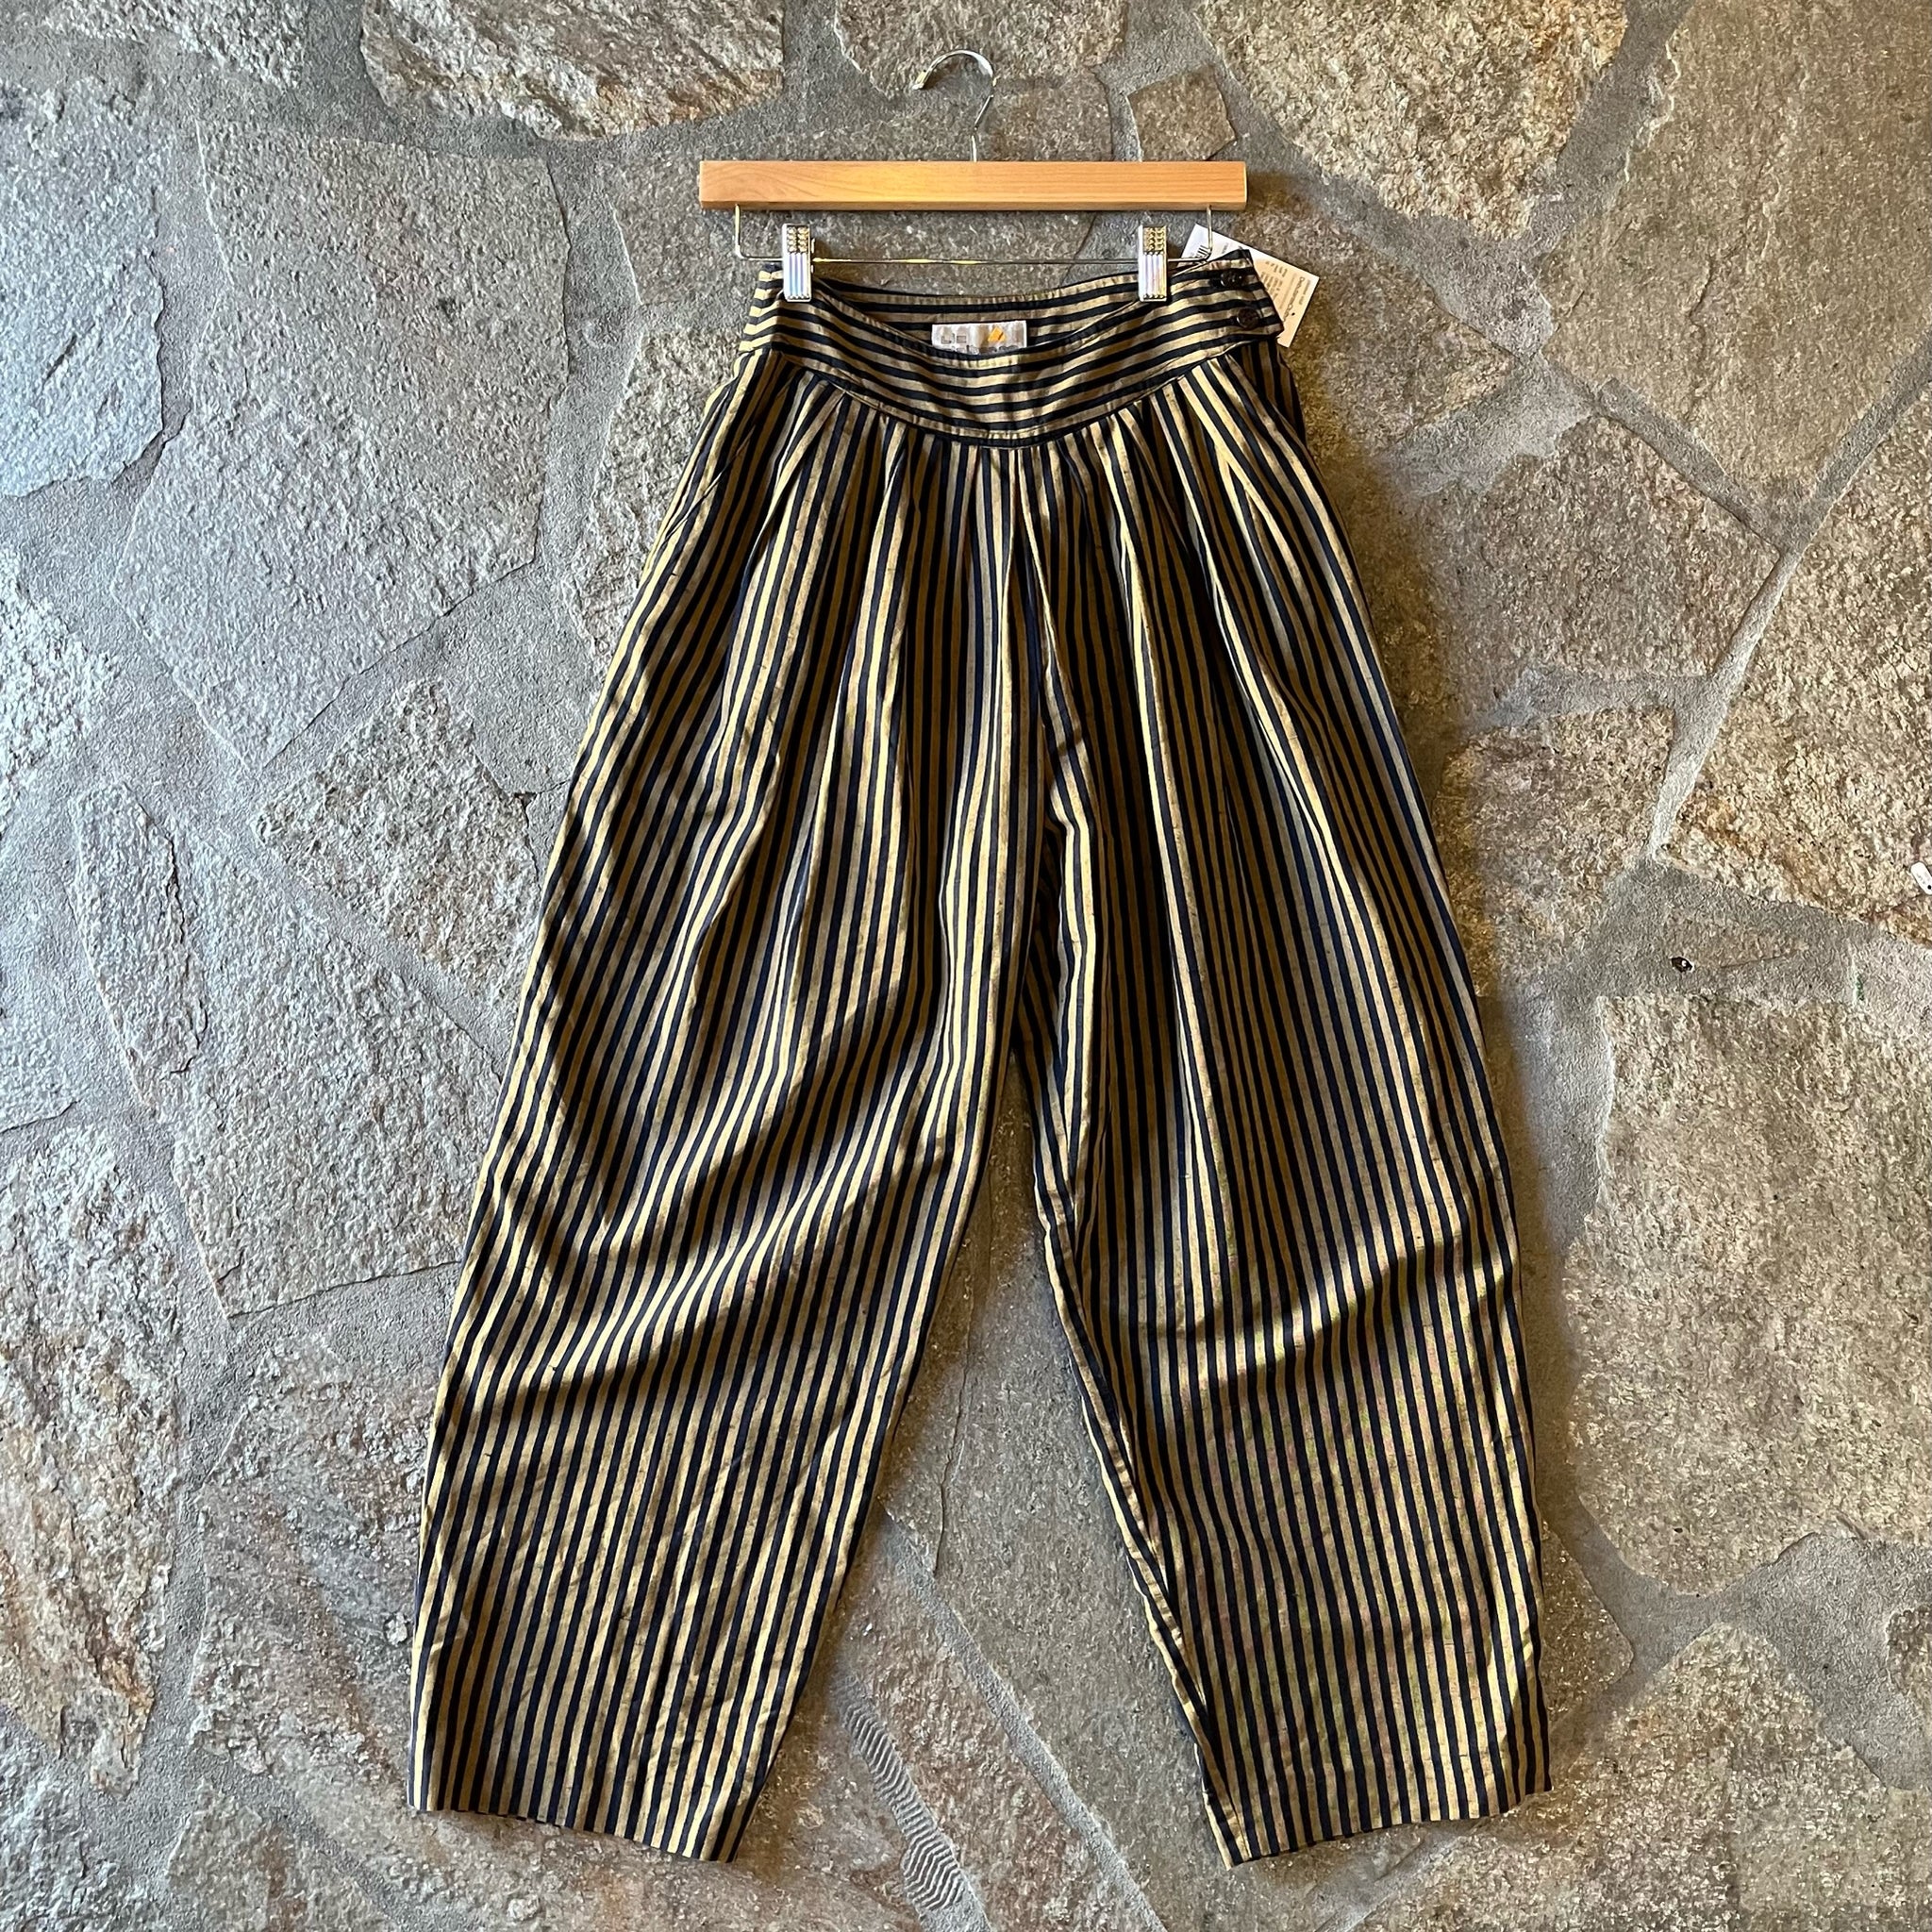 1980s Striped Clam Digger Pants